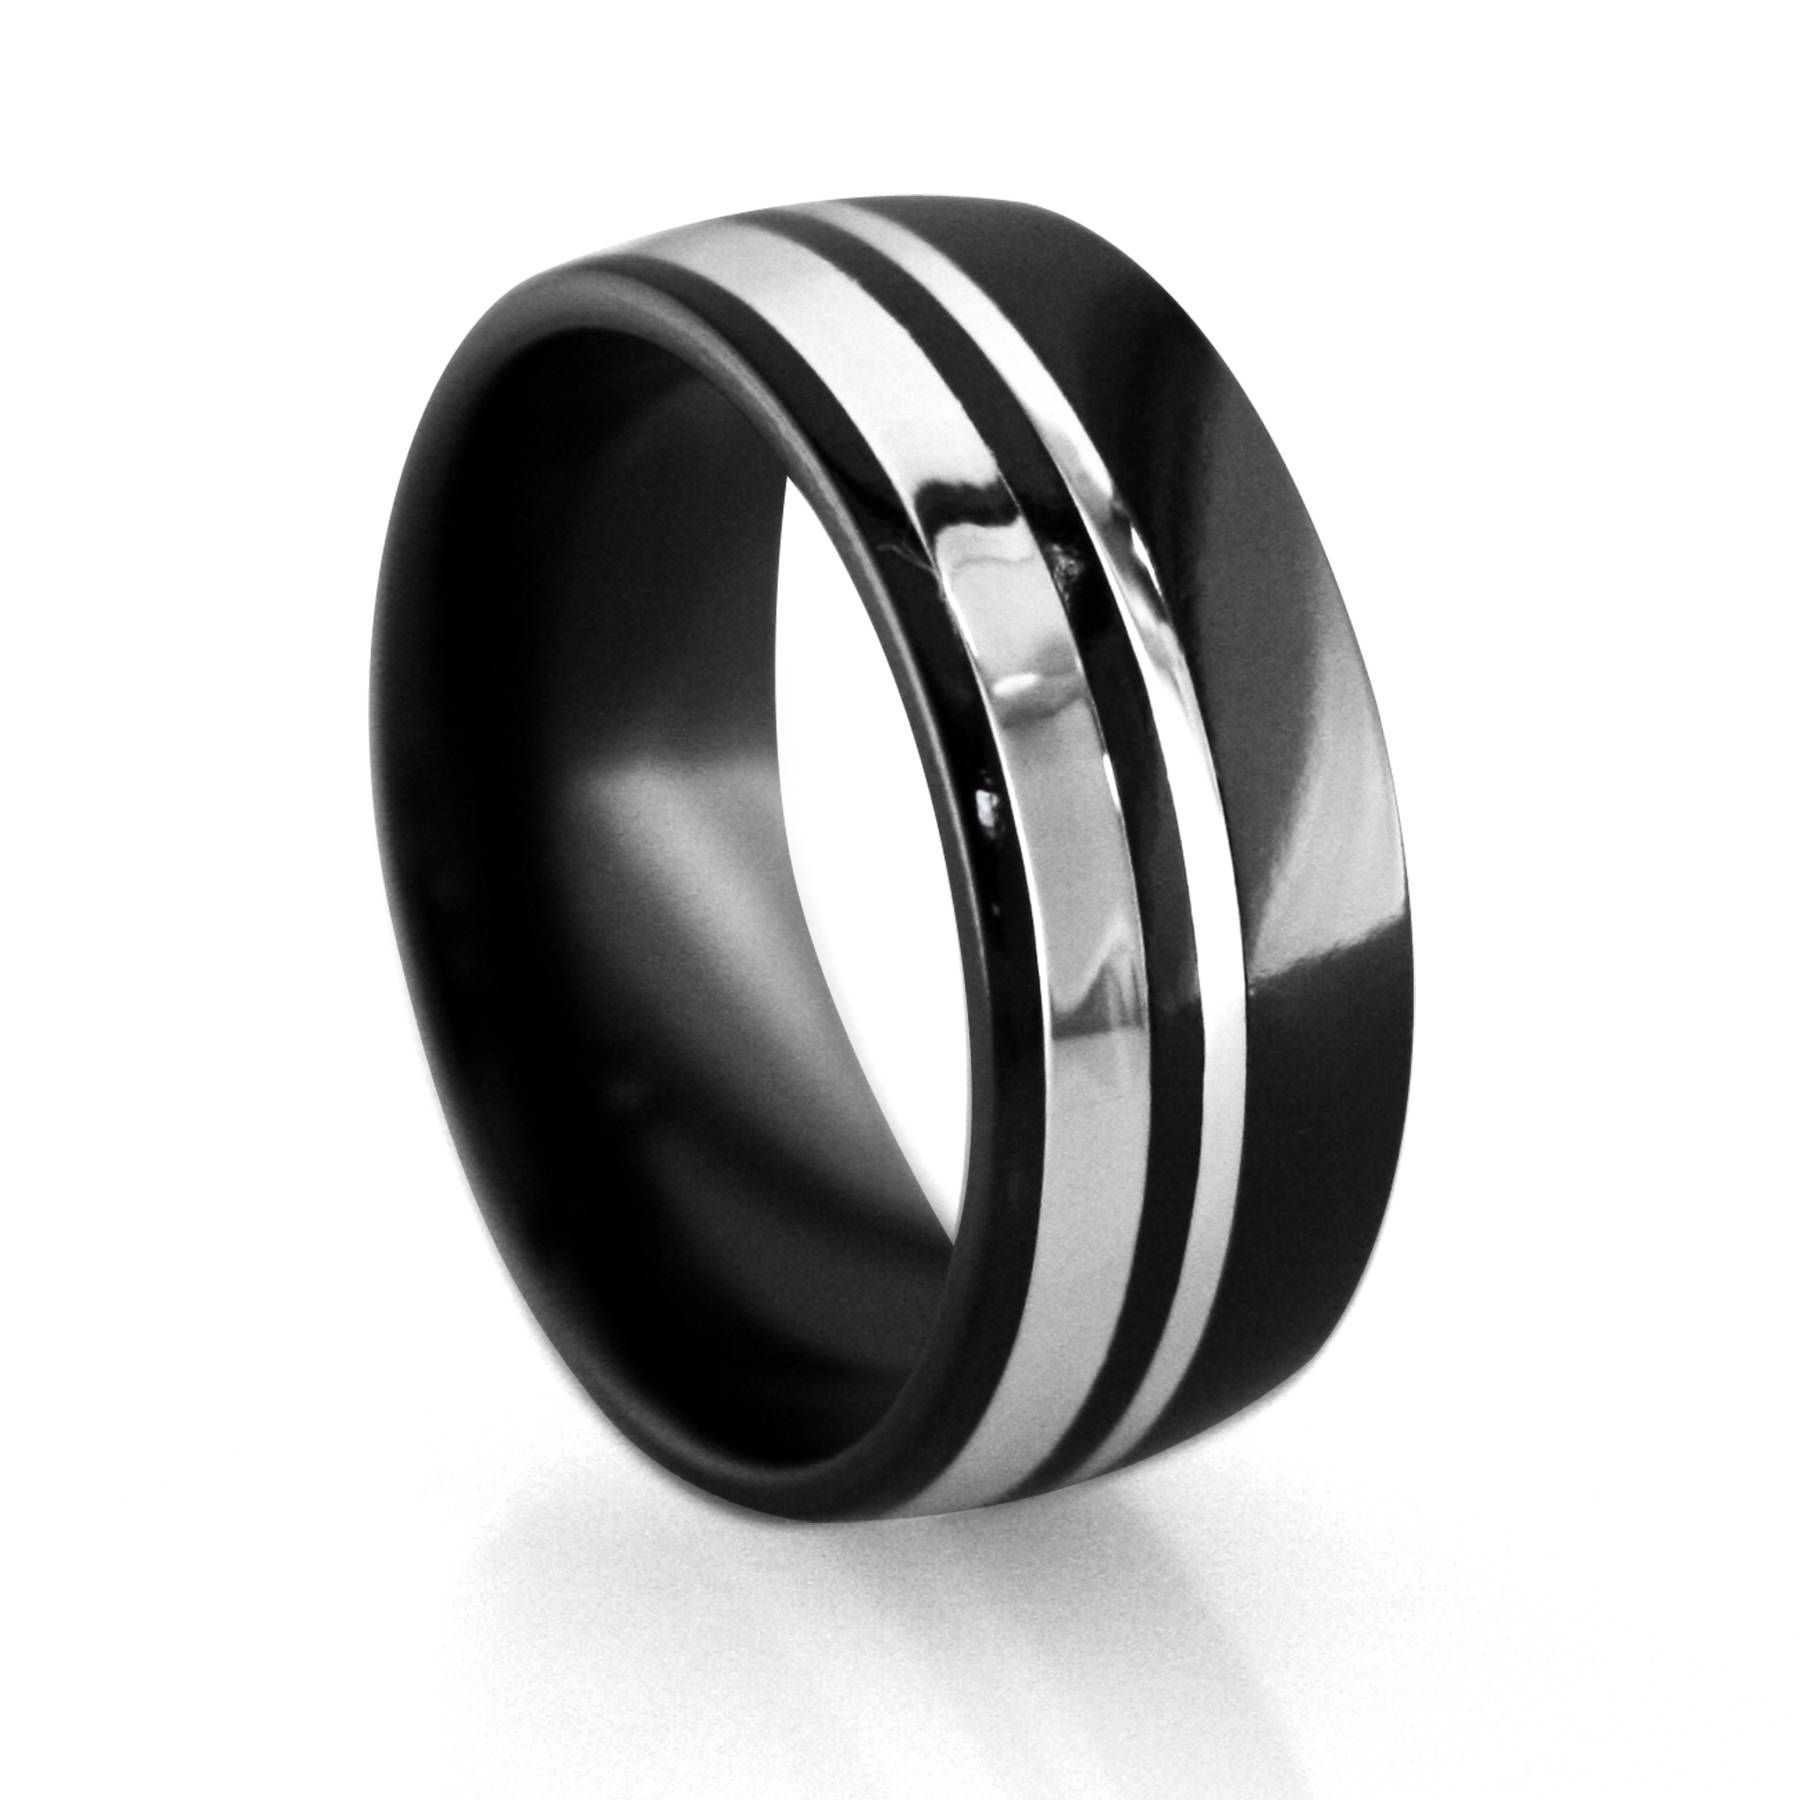 Black Gold Mens Wedding Rings Tags : Tungsten Mens Wedding Rings Pertaining To Gold And Black Mens Wedding Bands (View 12 of 15)